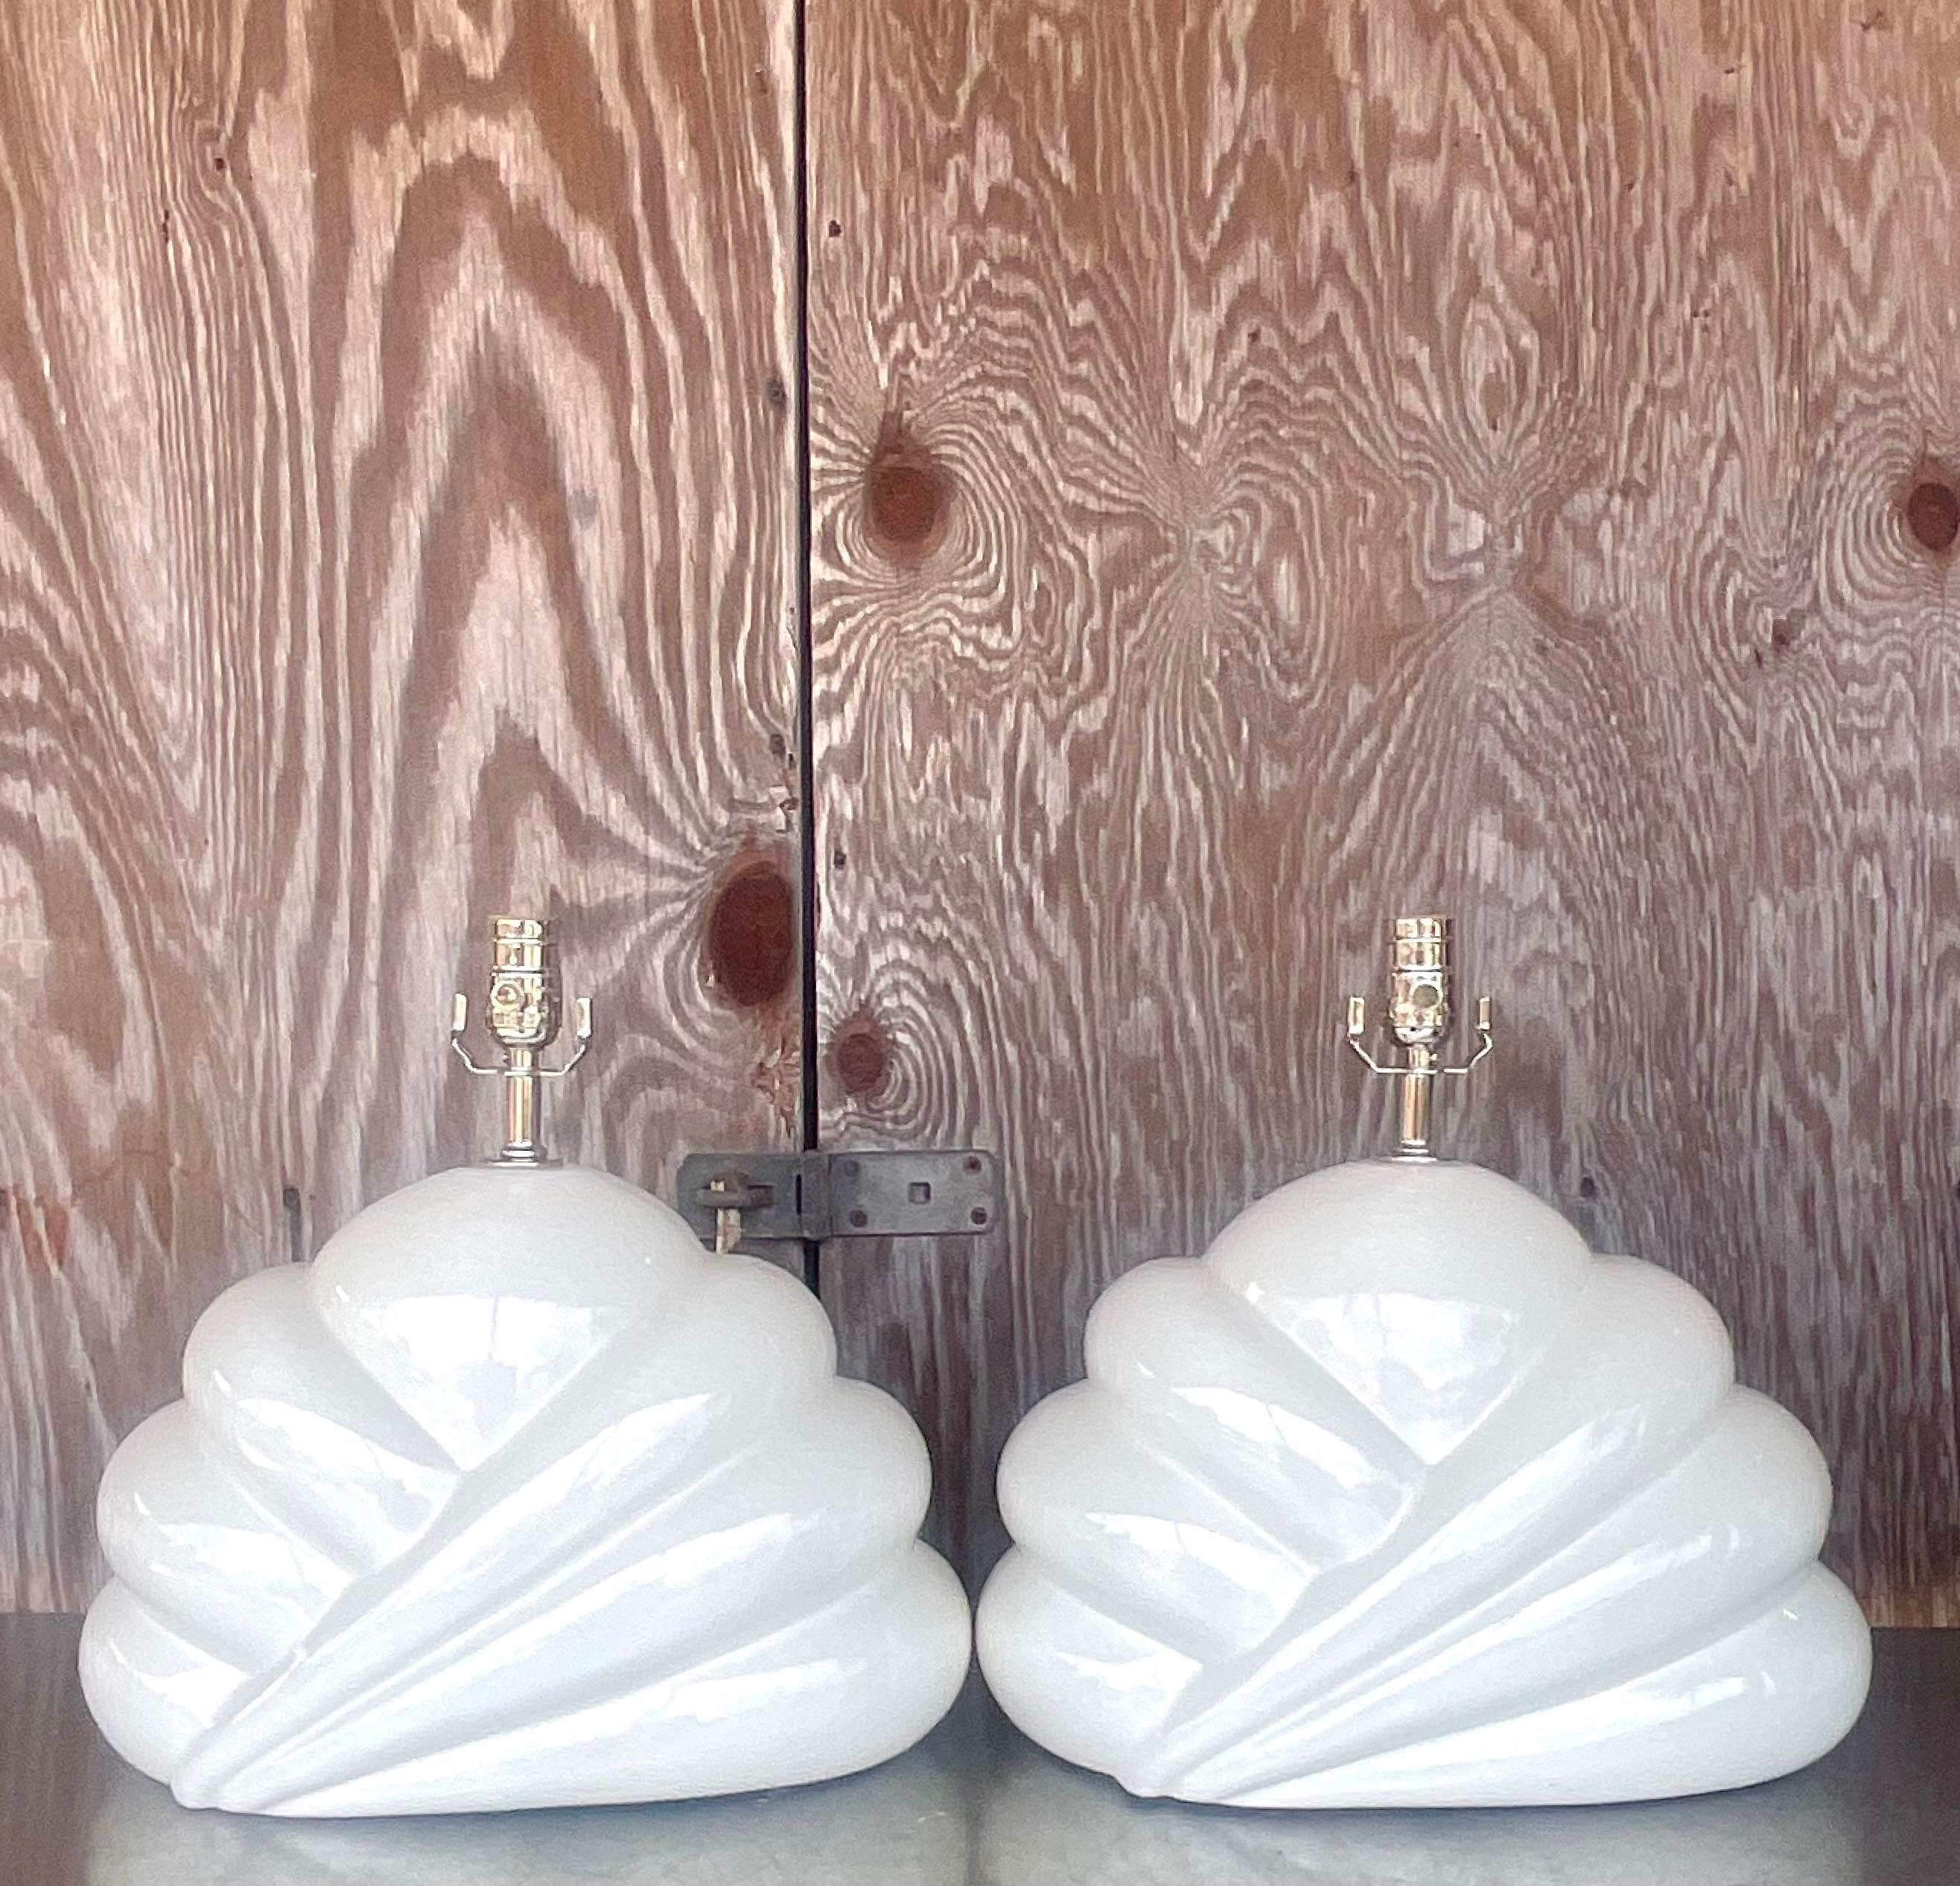 Vintage Boho Glazed Ceramic Cloud Lamps - a Pair In Good Condition For Sale In west palm beach, FL